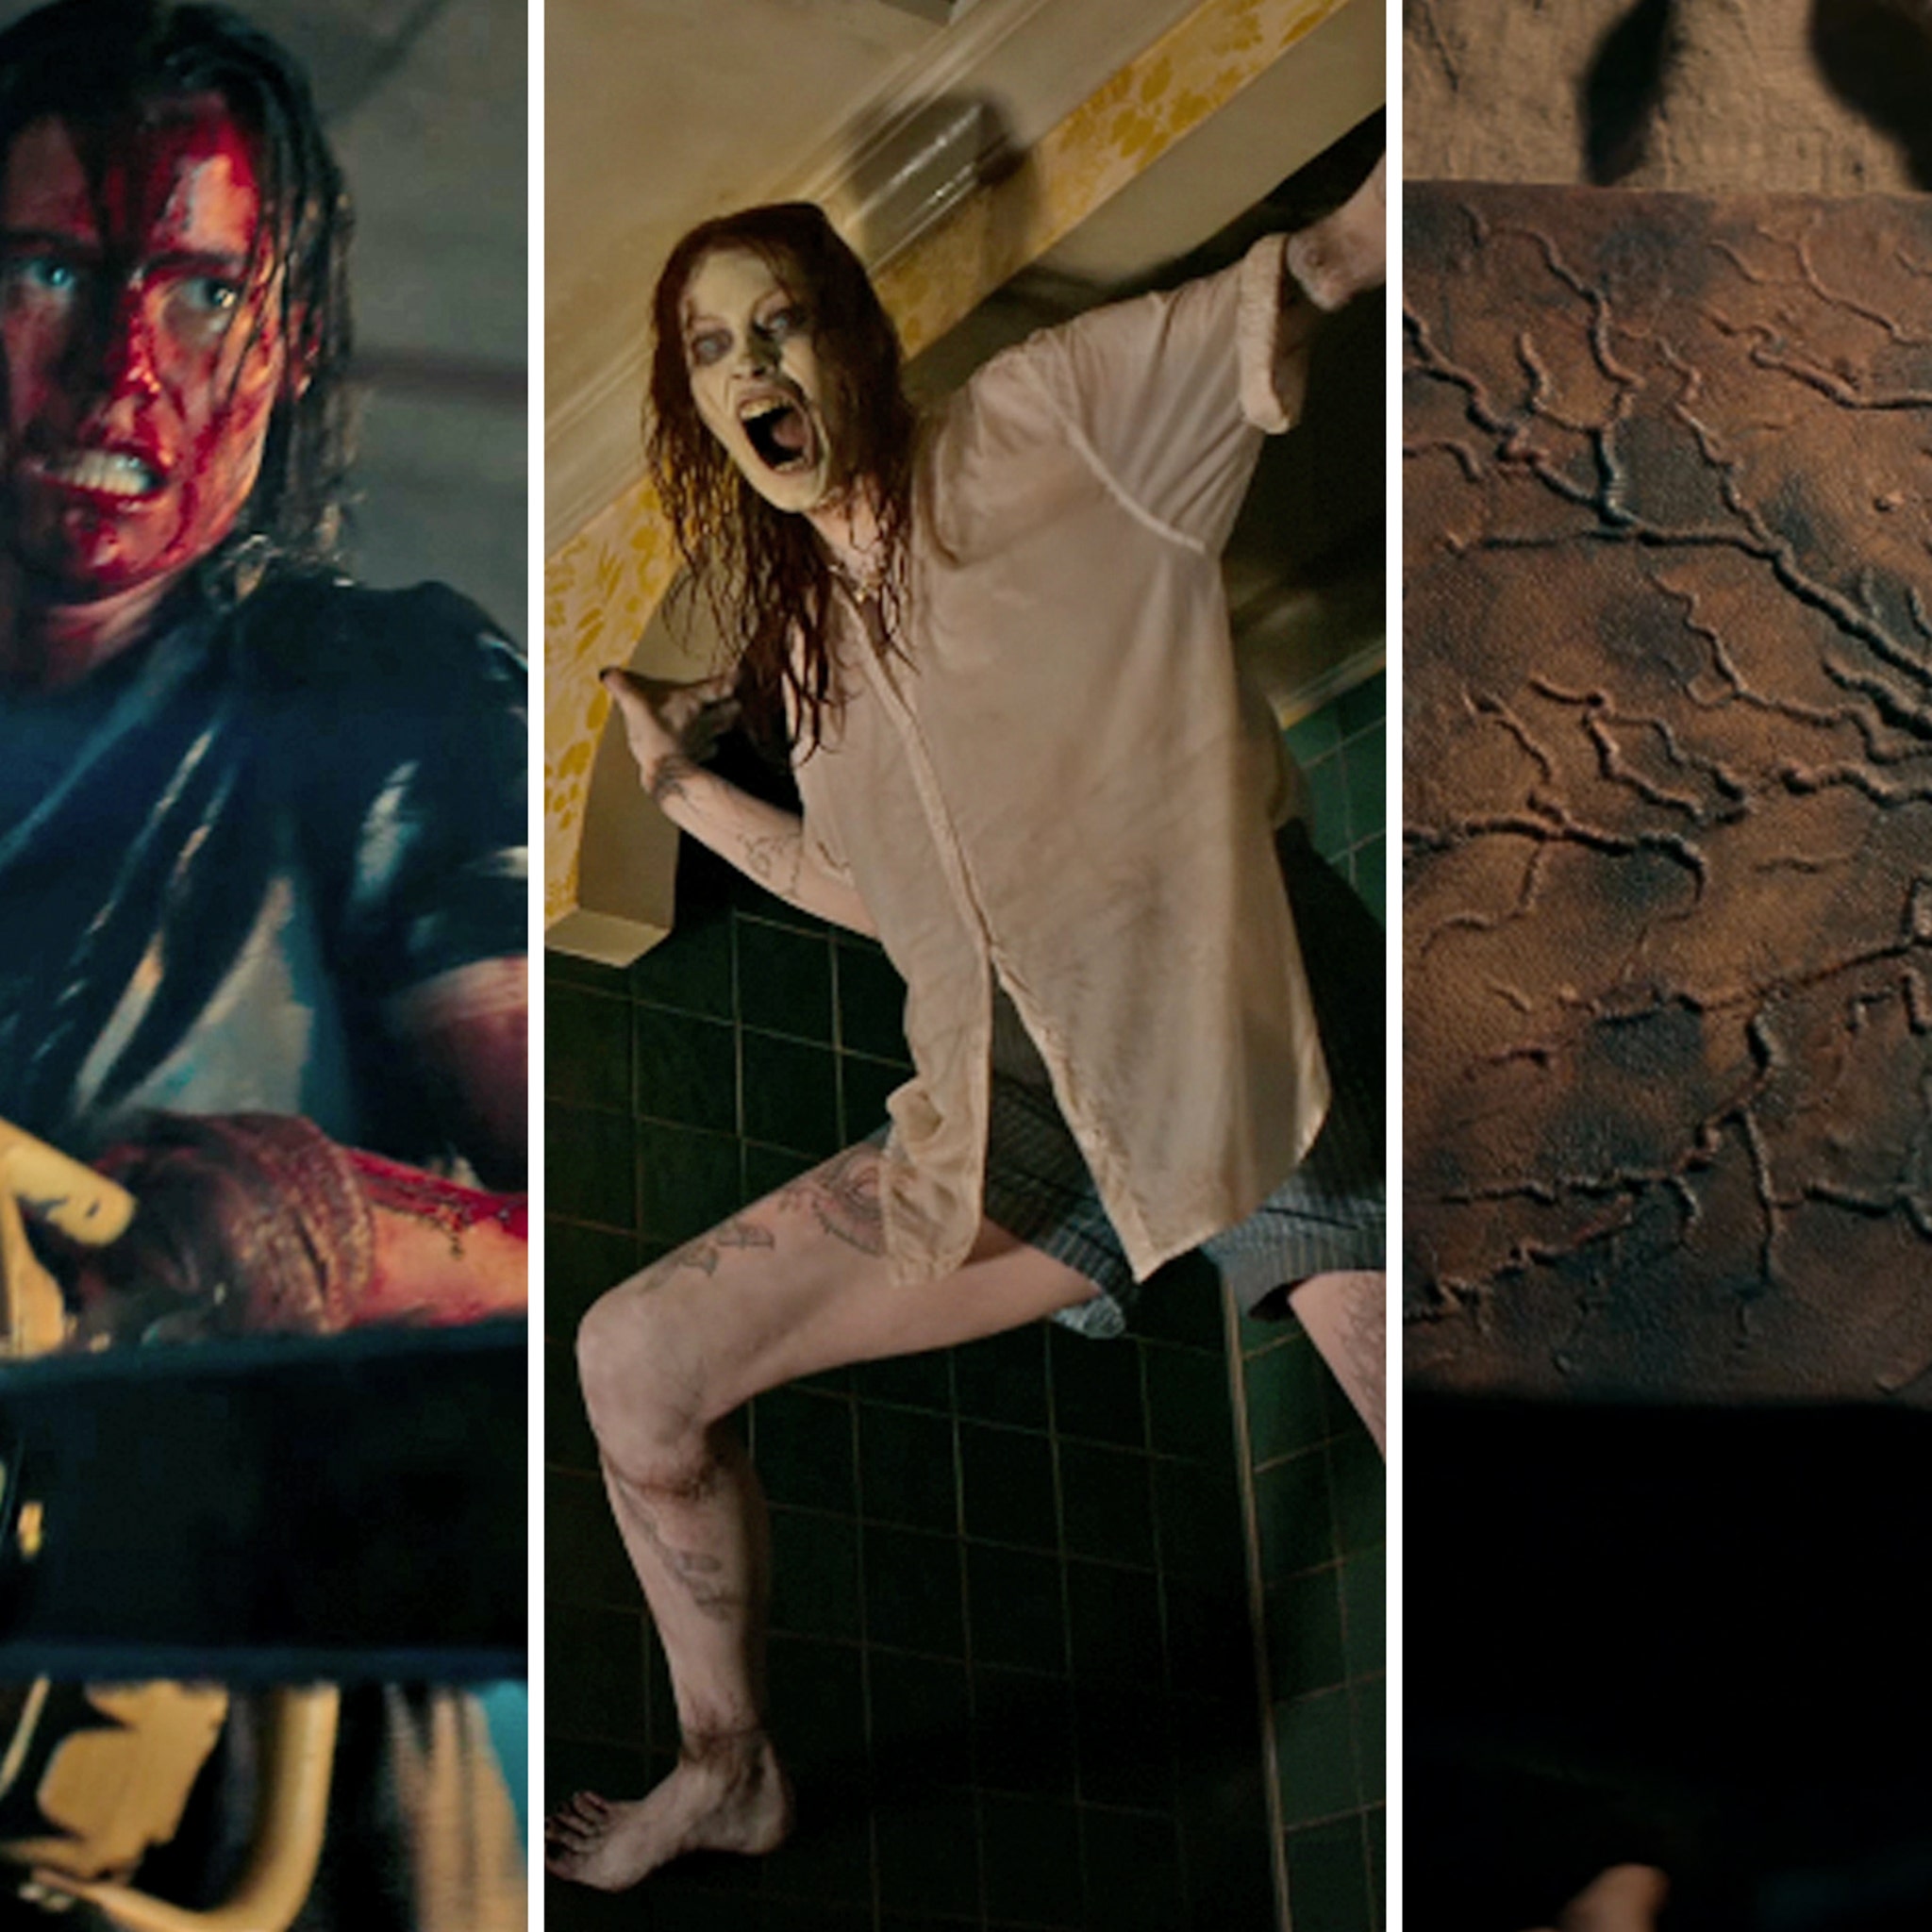 The 'Evil Dead Rise' Trailer Gave Me Everything I Wanted! – The